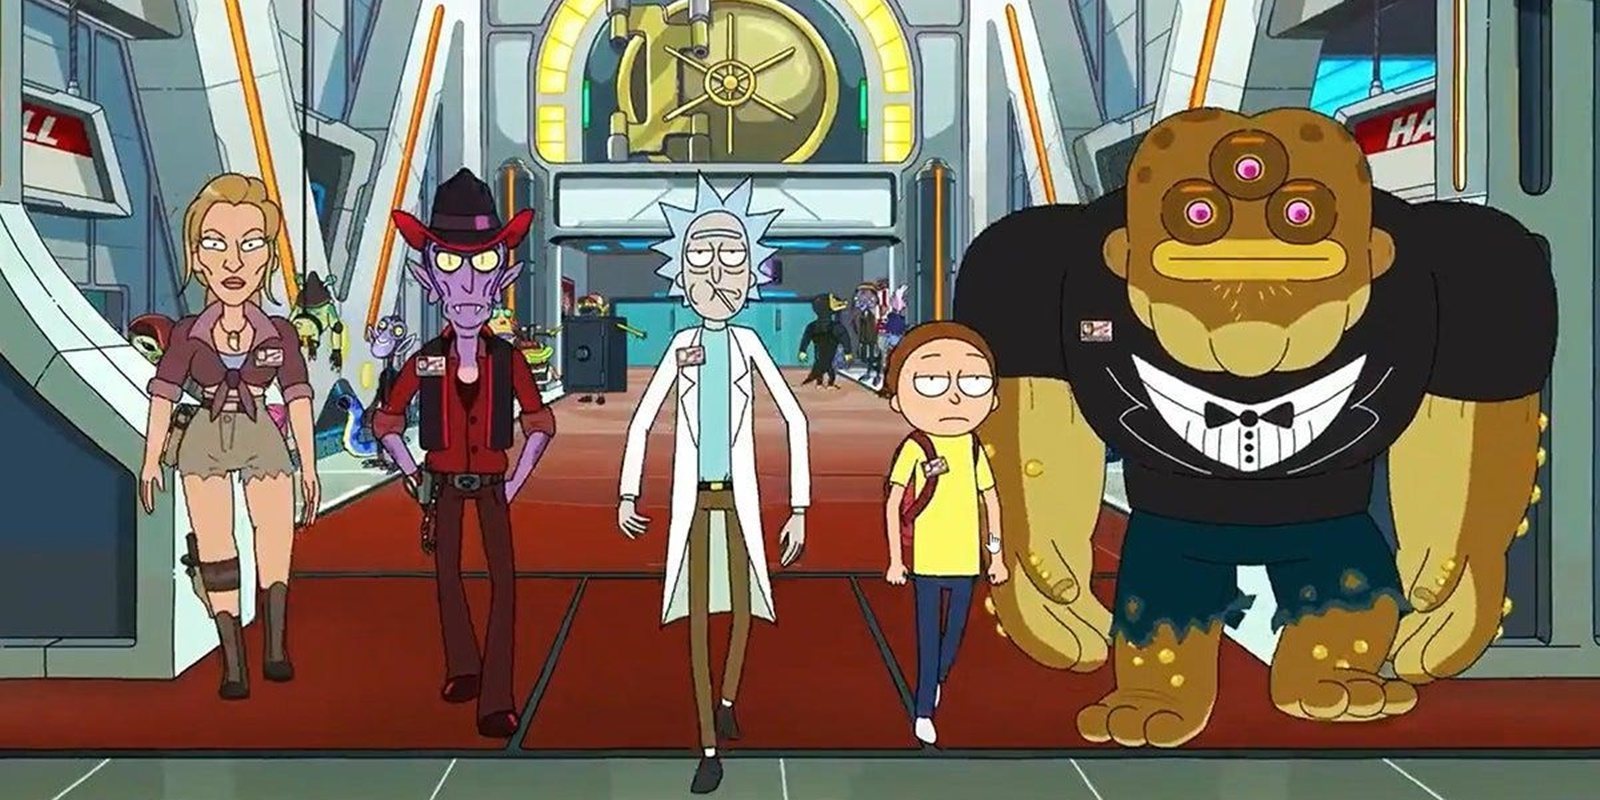 'Rick & Morty' 4x03: "One crew over the Crewcoo's Morty"